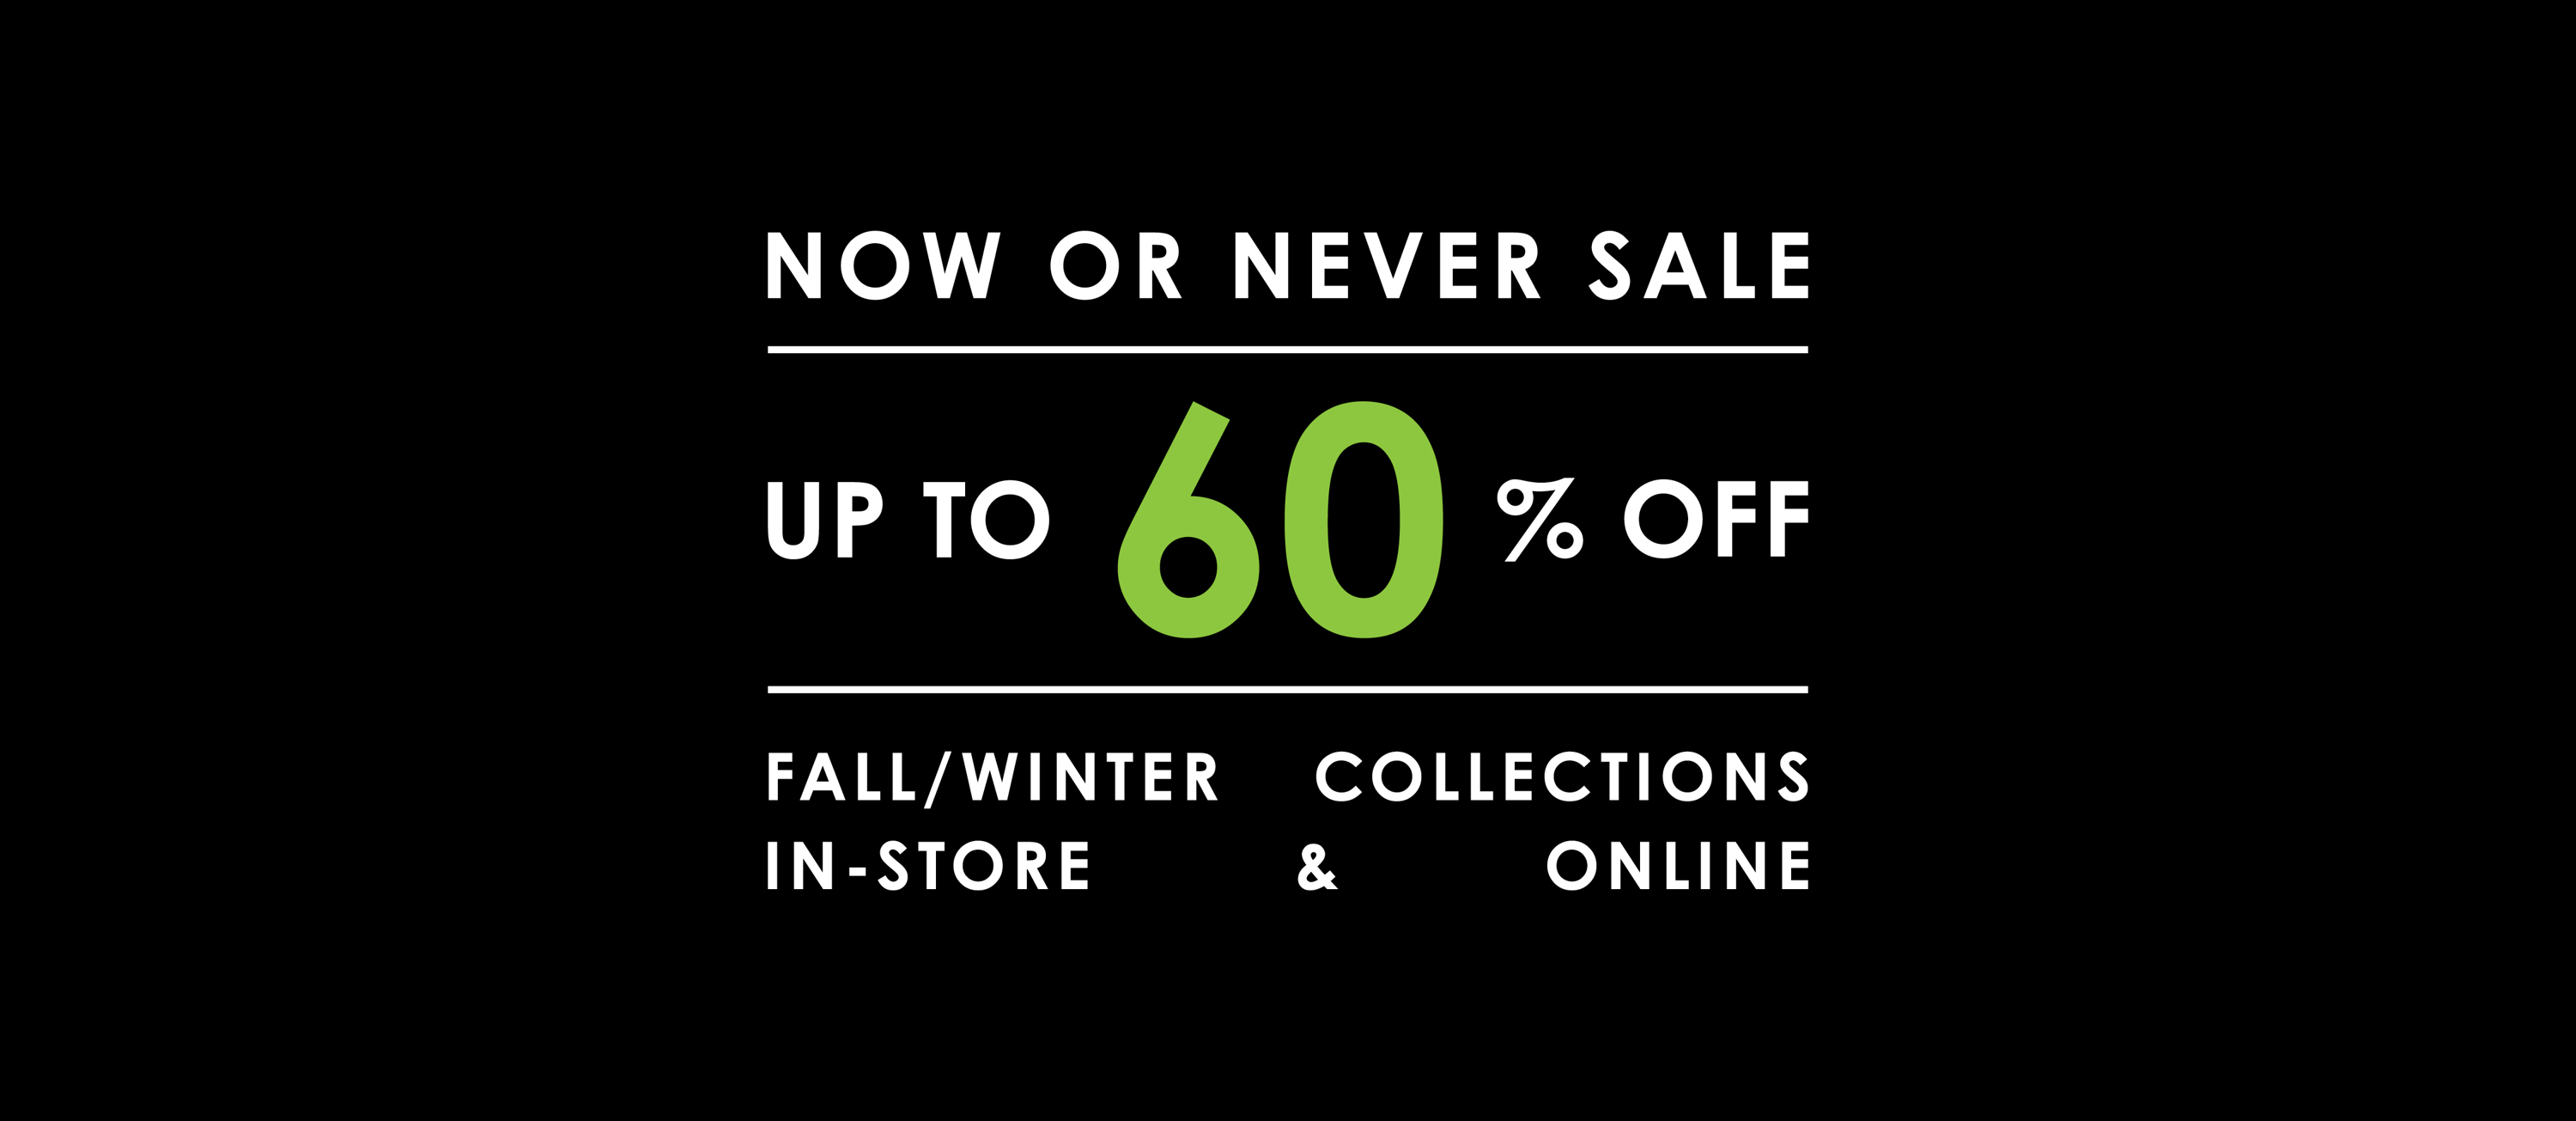 Now or Never Sale - Up to 60% Off